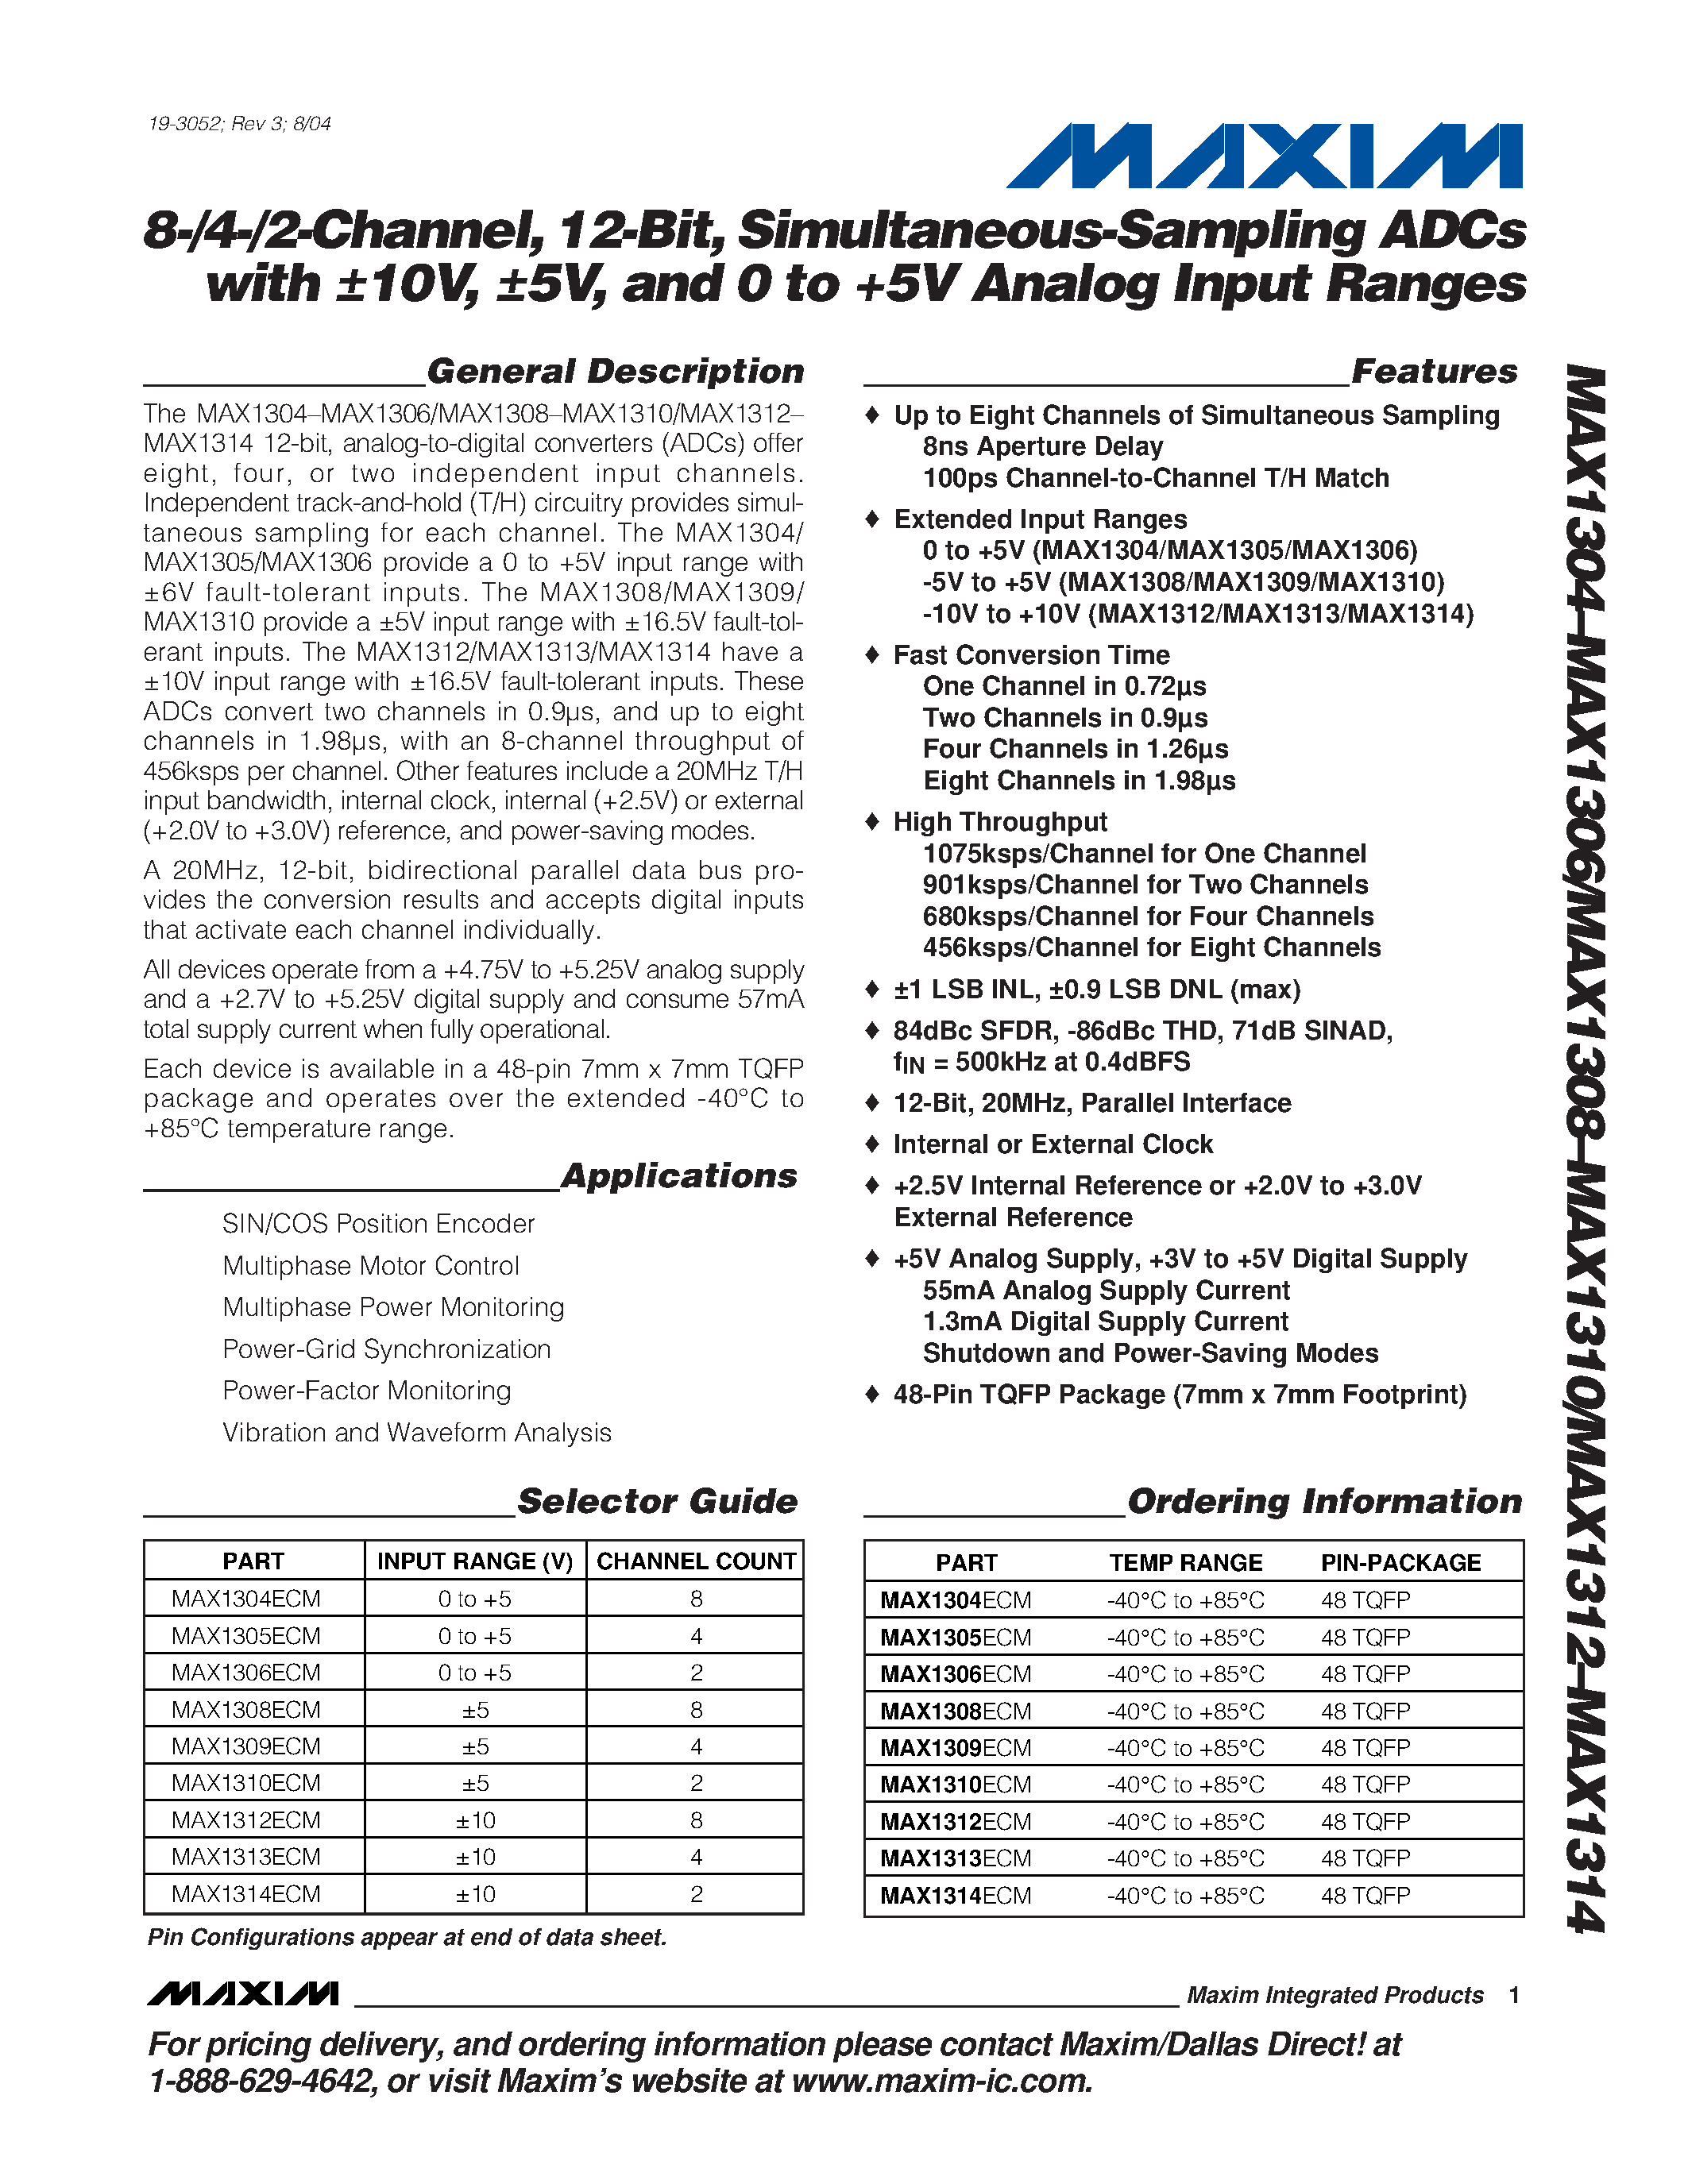 Datasheet MAX1308ECM - 8-/4-/2-Channel / 12-Bit / Simultaneous-Sampling ADCs with 10V / 5V / and 0 to +5V Analog Input Ranges page 1